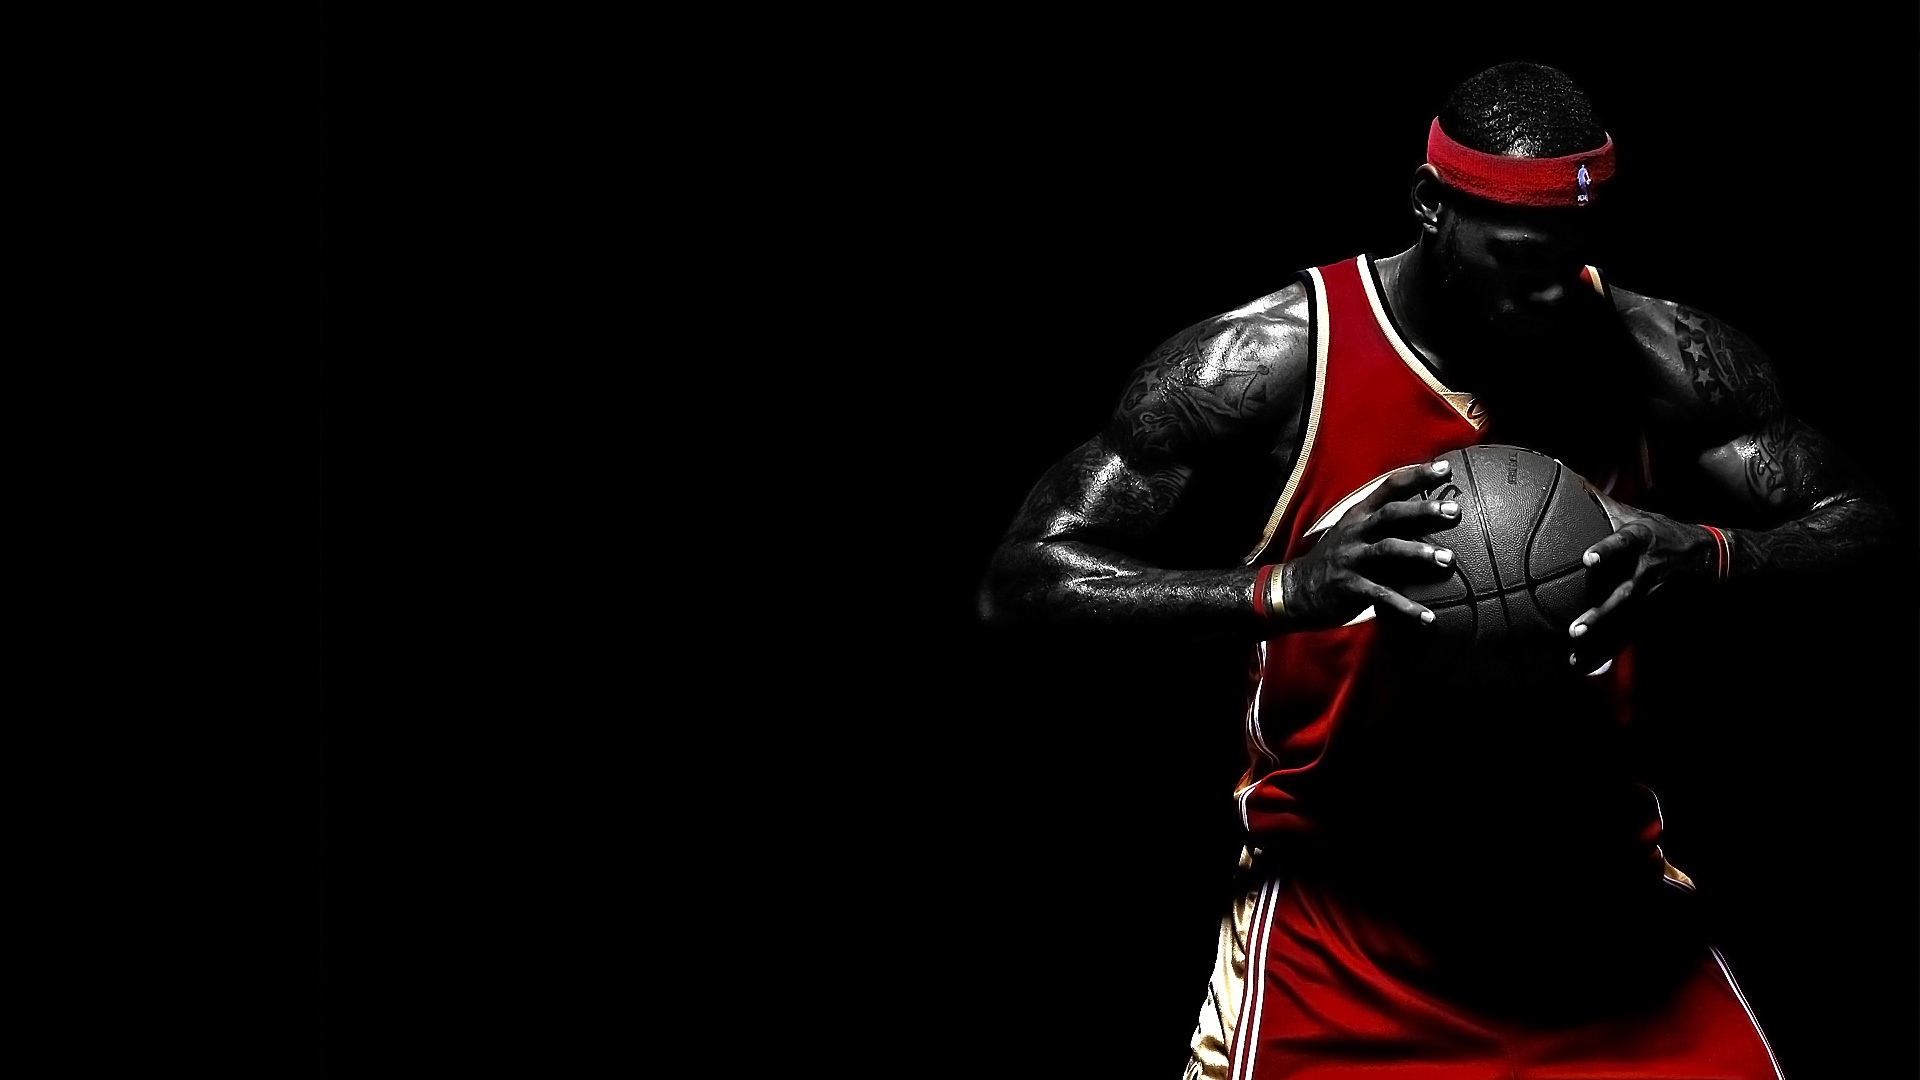 Collection of Cool Basketball Wallpapers Hd on HDWallpapers